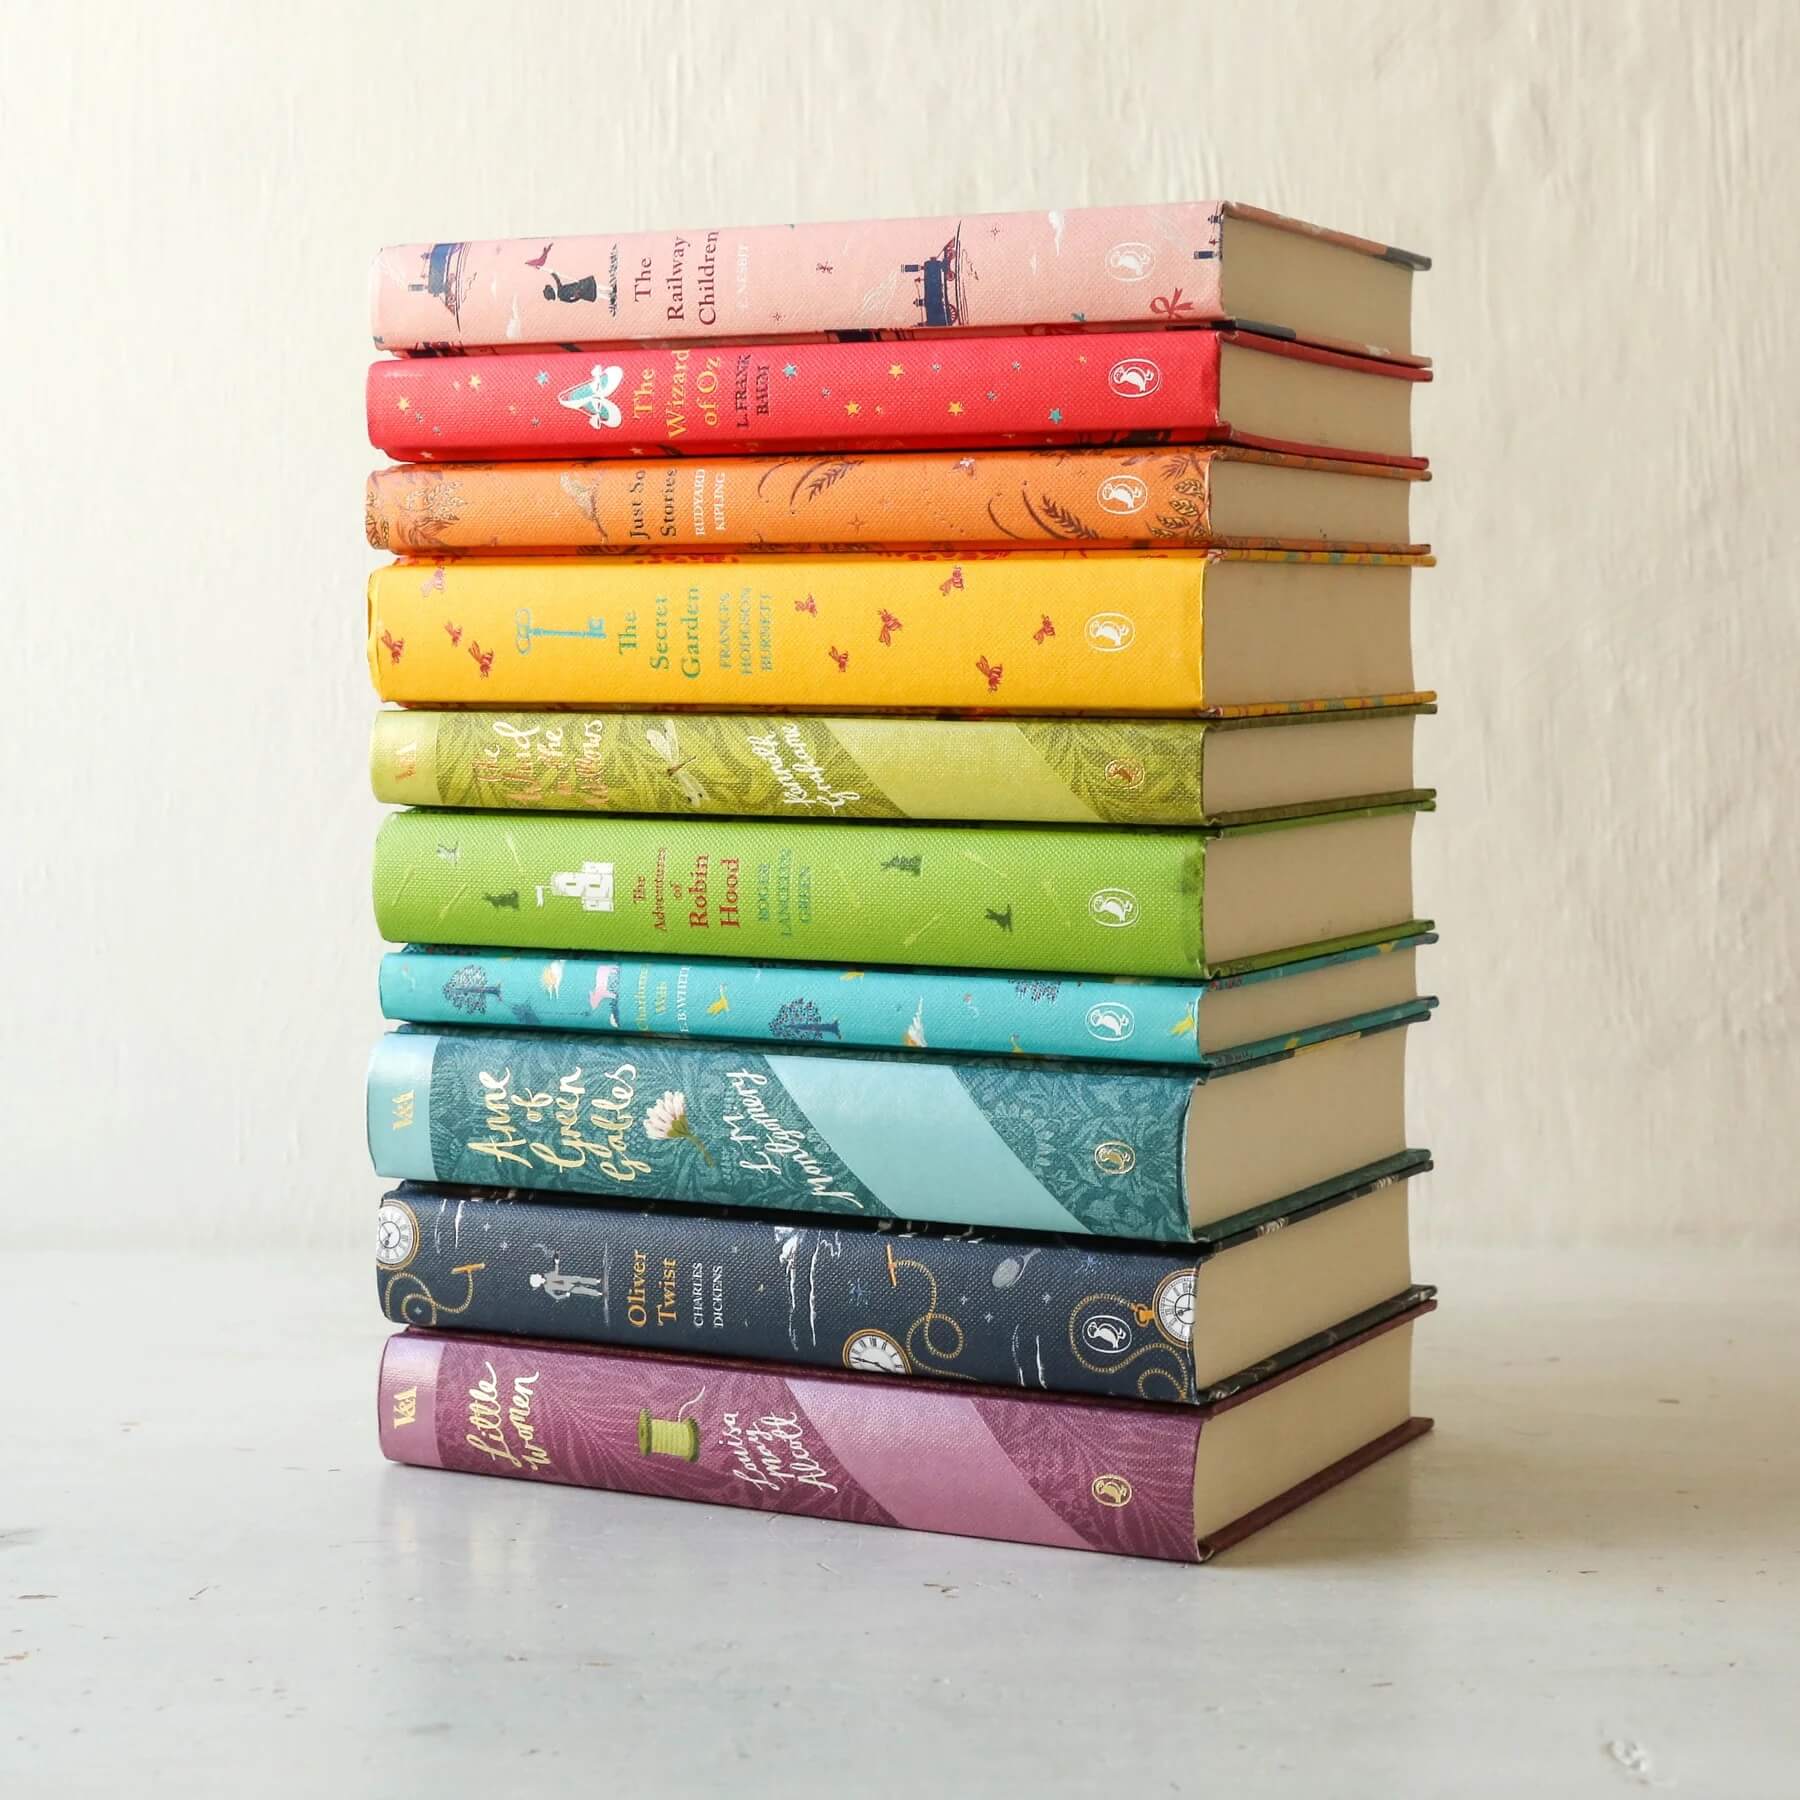 91 Magazine independent Christmas Gift Guide - Rainbow books collection from Berylune